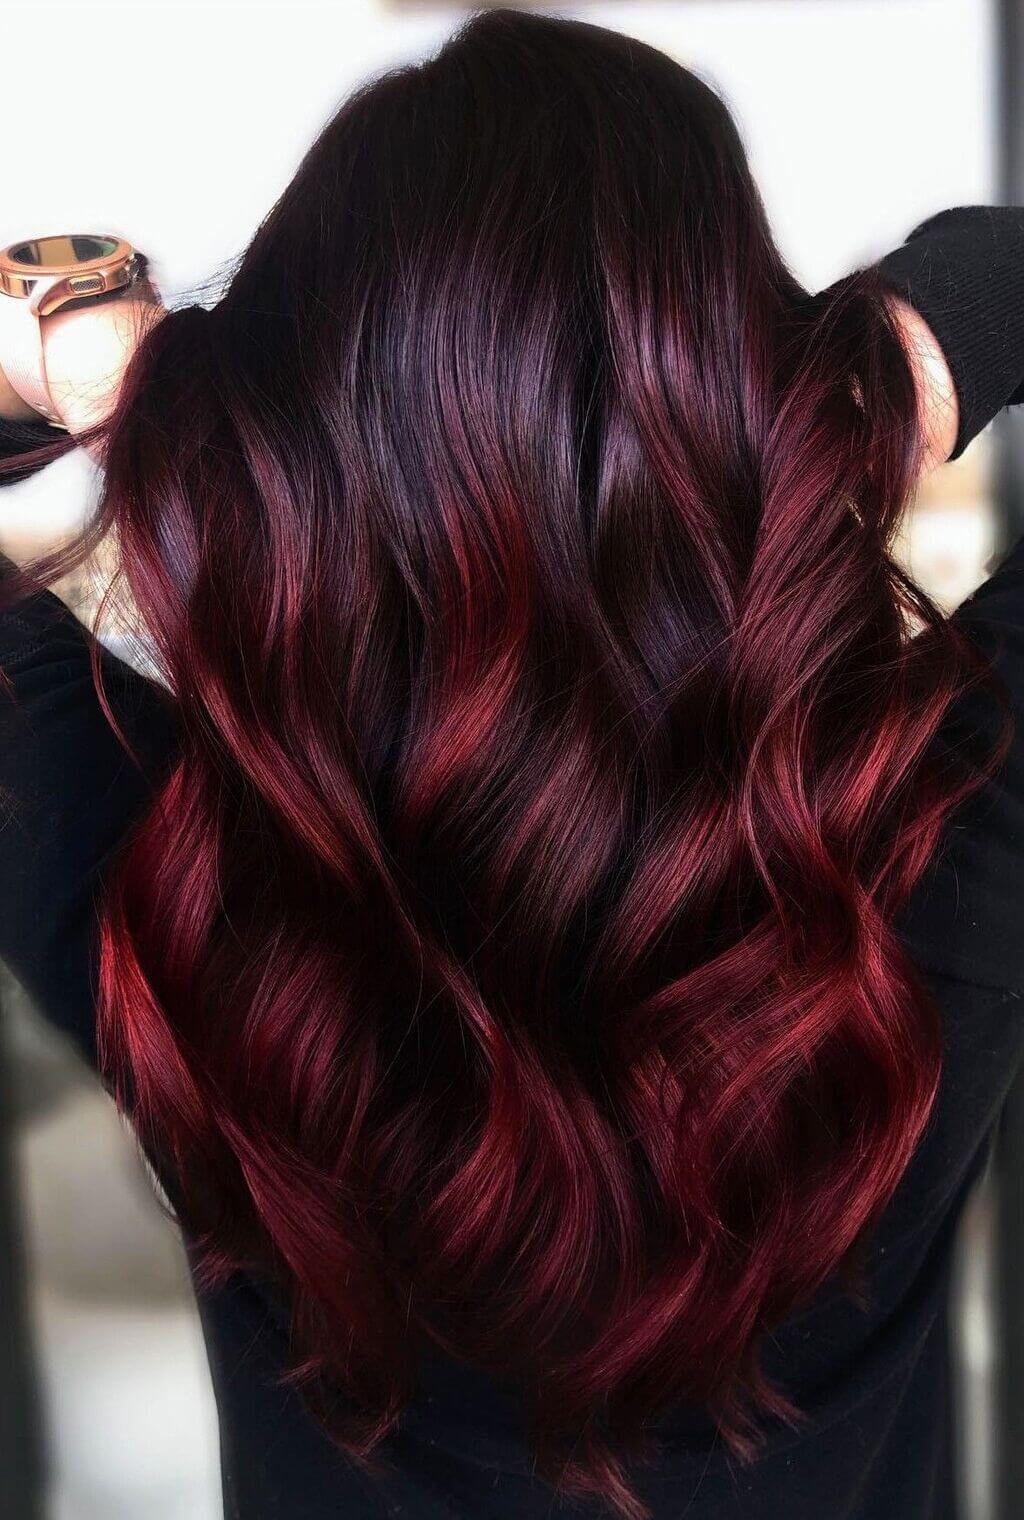 Burgundy Highlights 10 Stunning Looks for Women to Rock